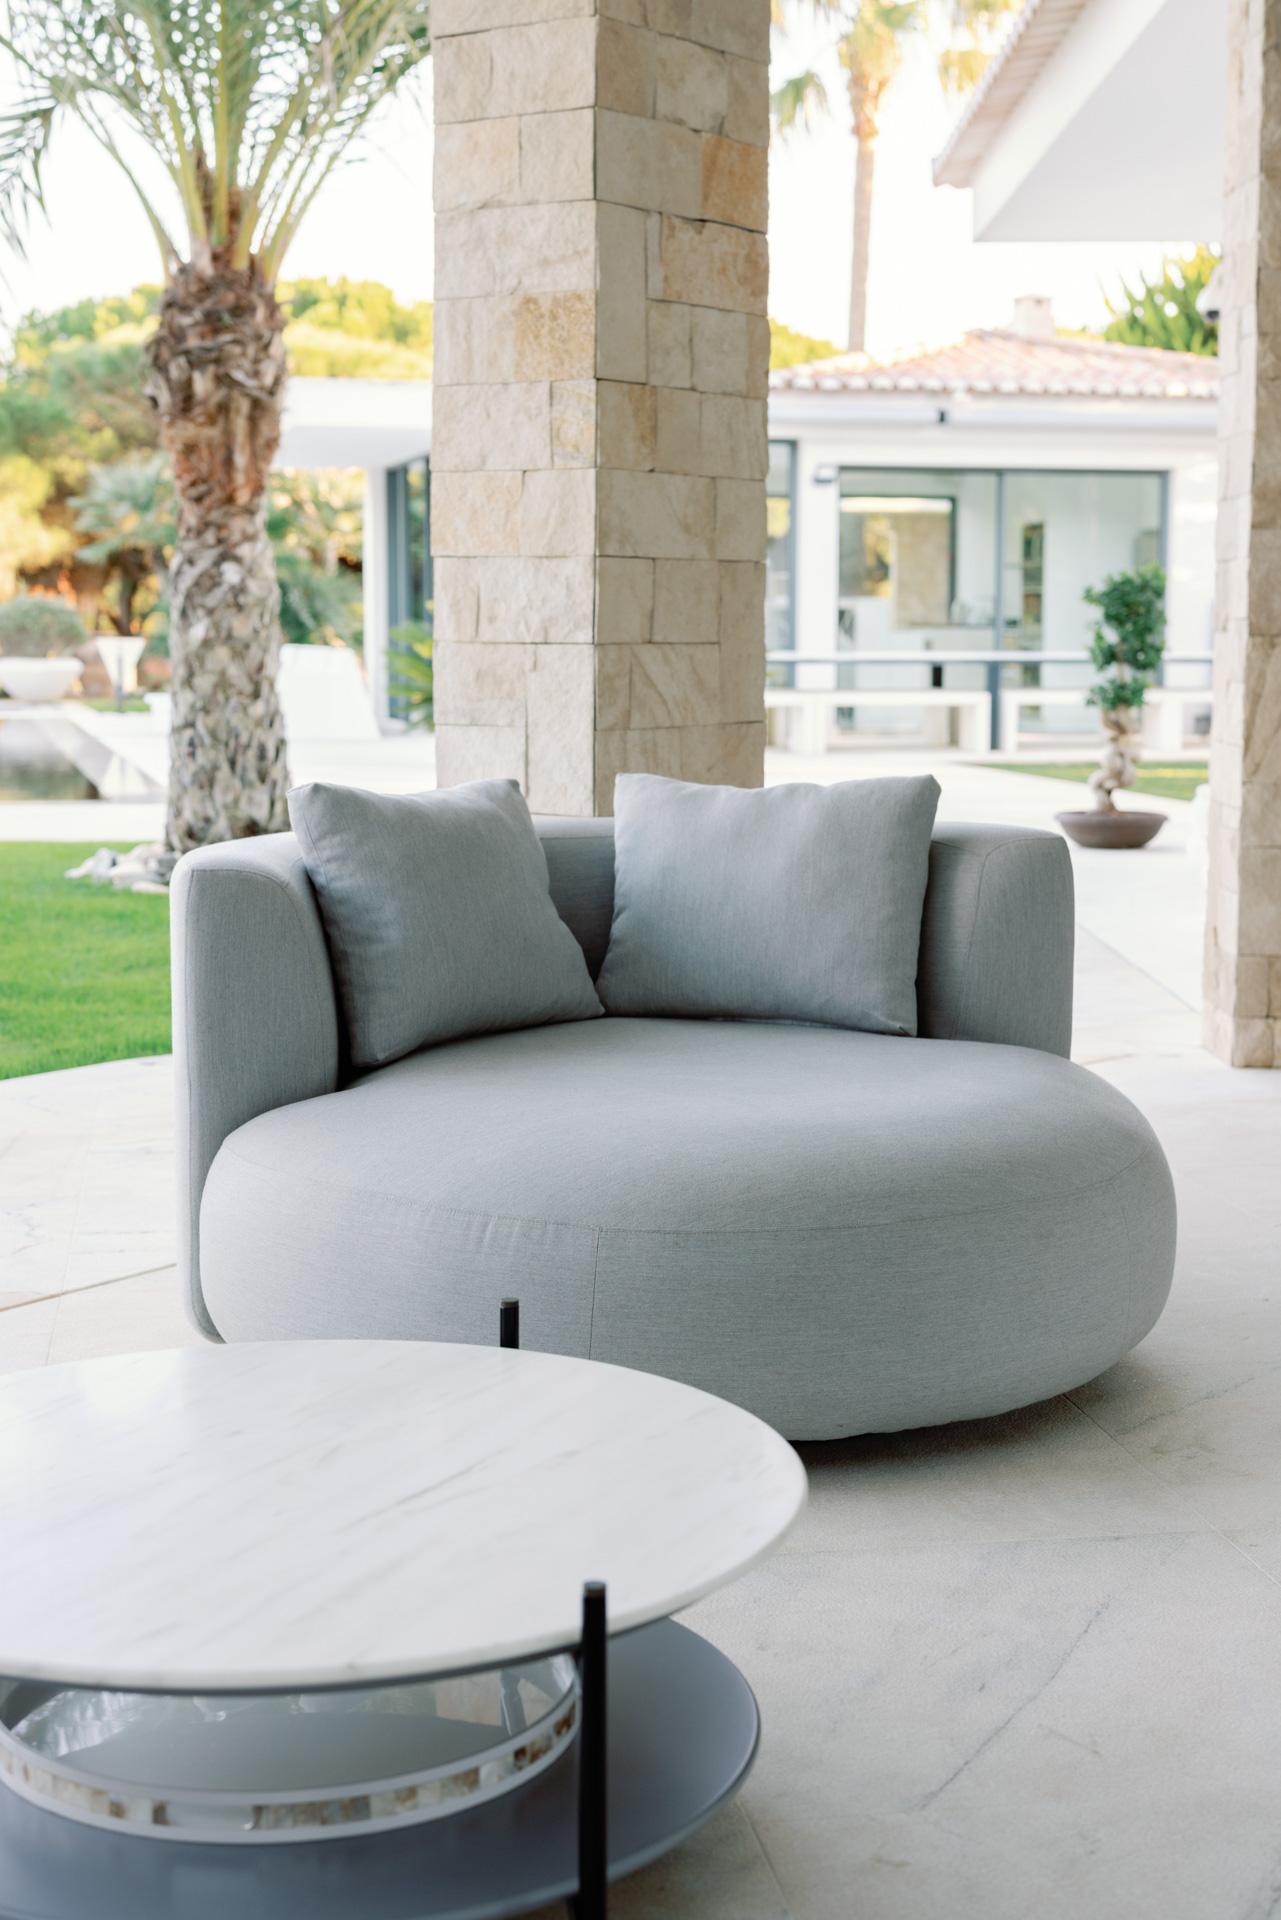 Twins Outdoors Chaise Longue, Contemporary Collection, Handcrafted in Portugal - Europe by Greenapple.
 
Designed by Rute Martins for the Contemporary Collection, the Twins outdoors chaise lounge and curved sofa share the same genes, yet each